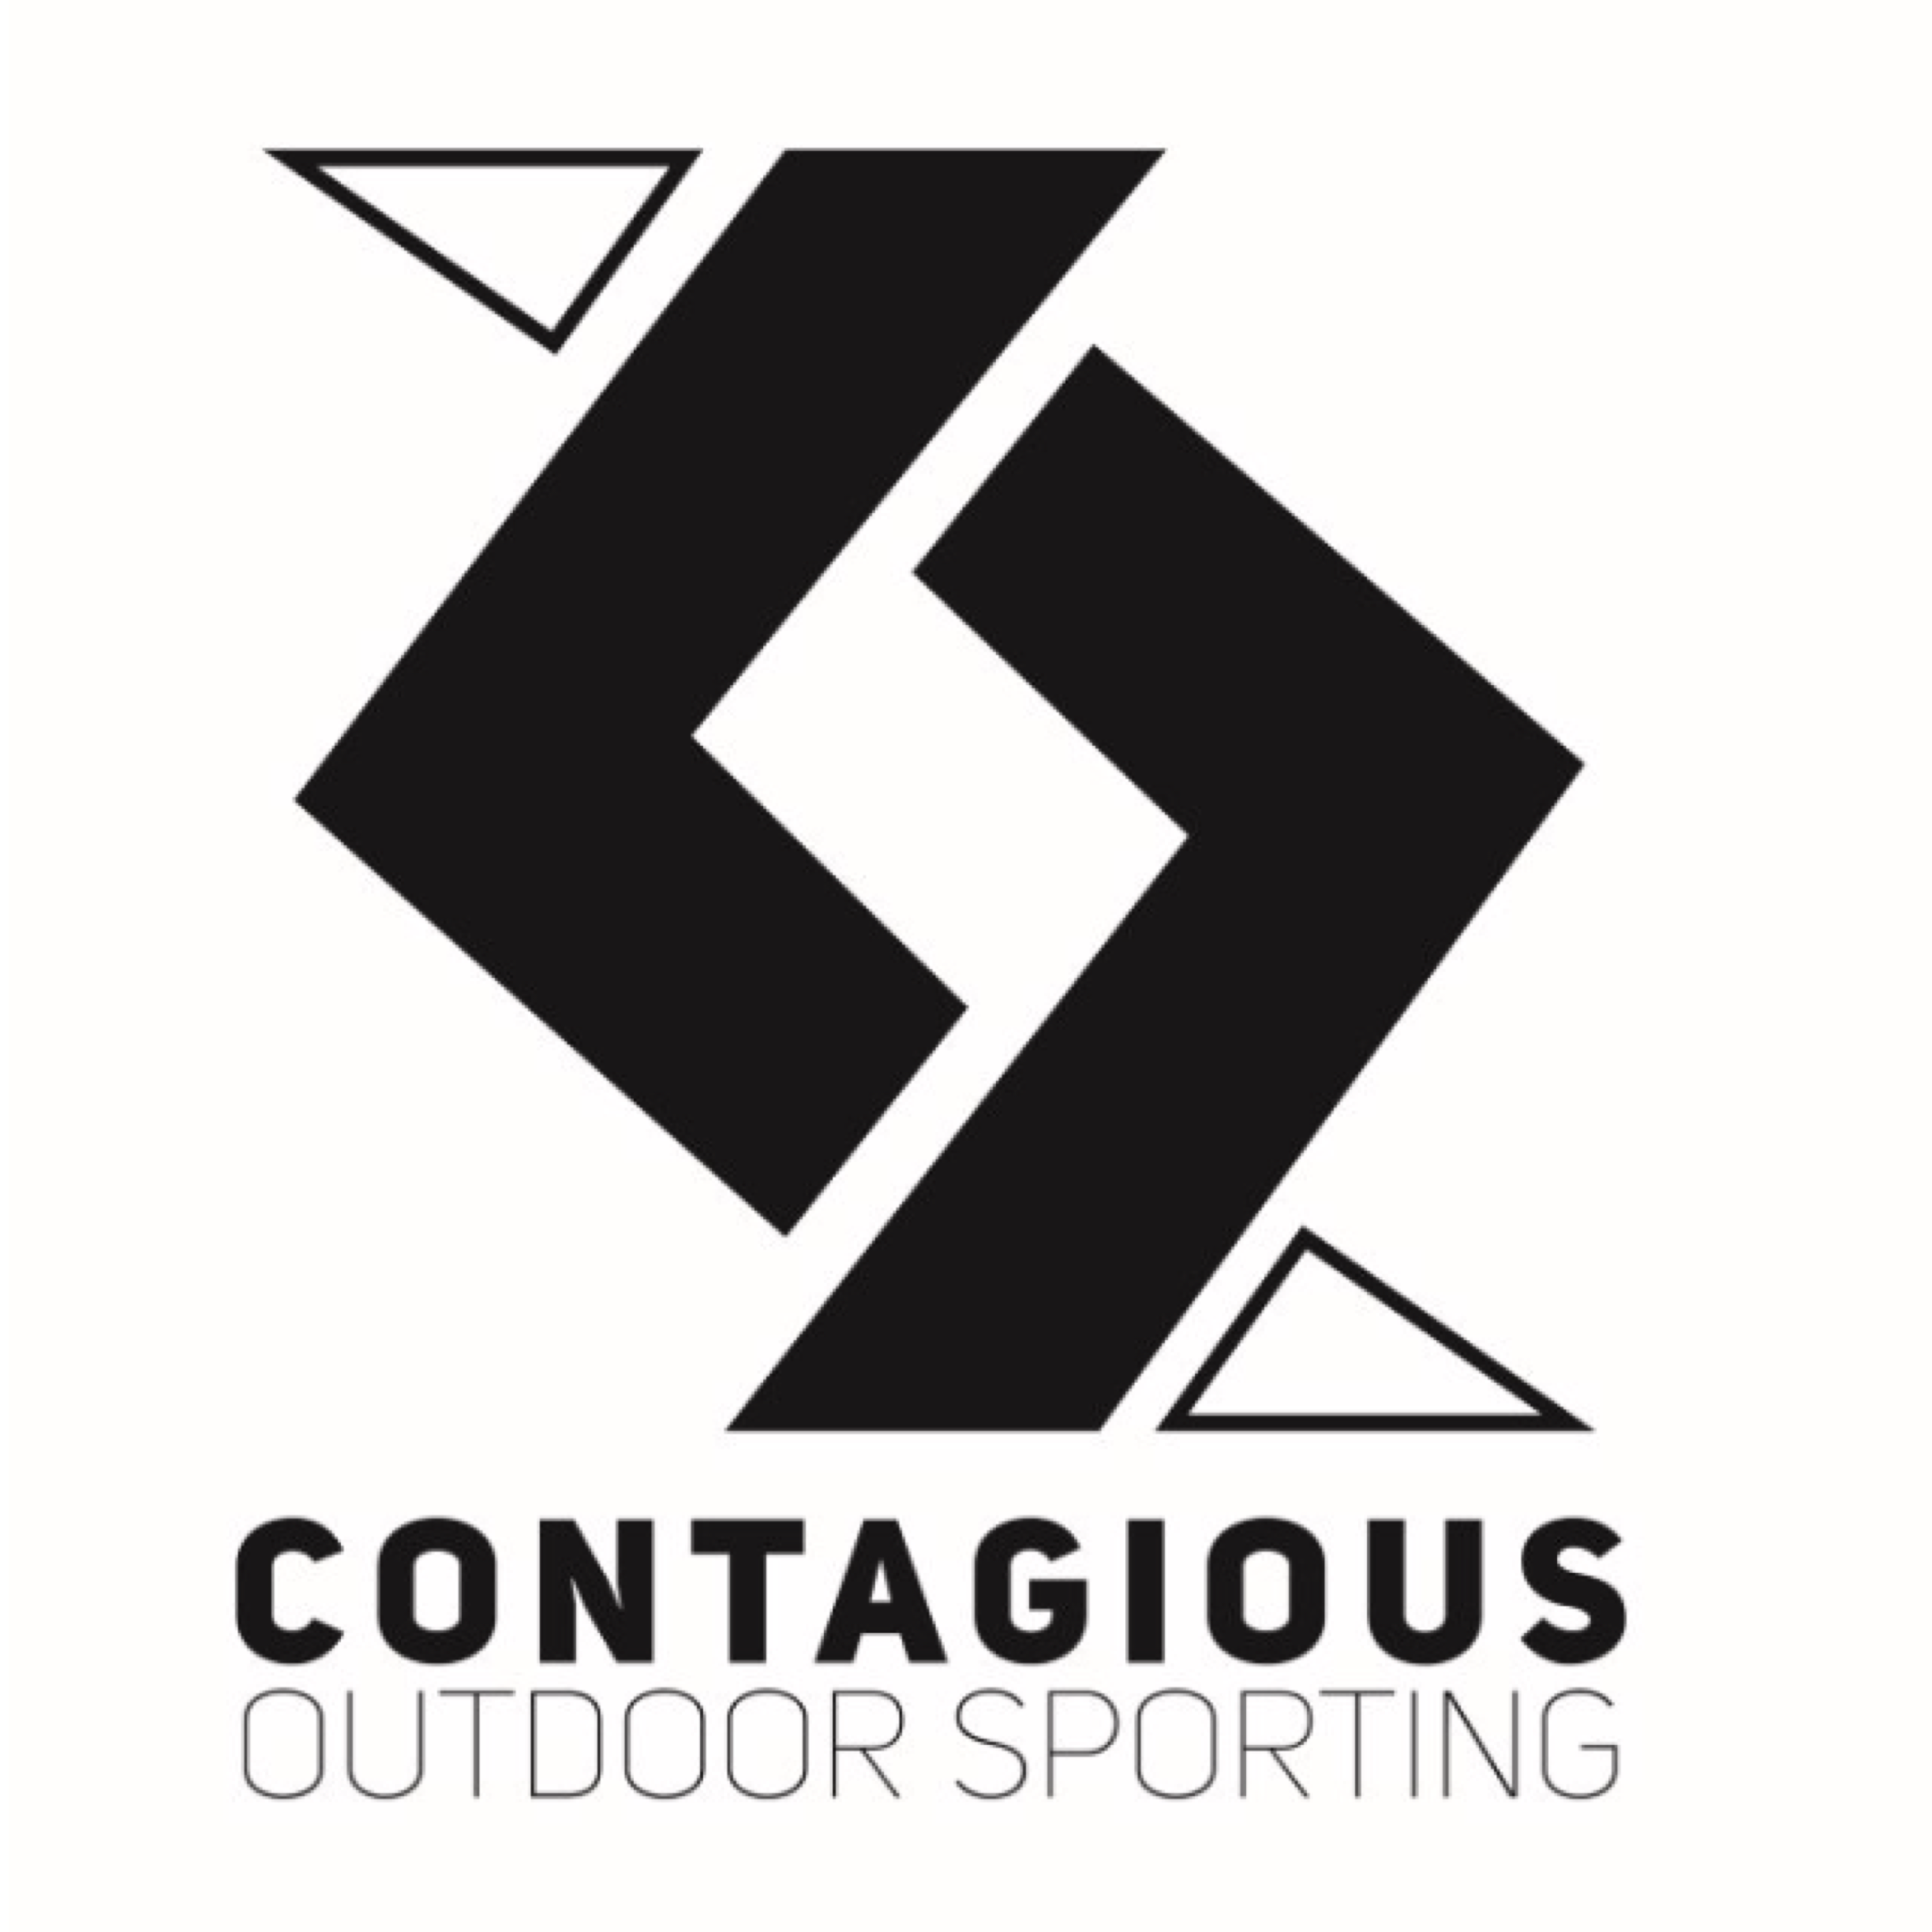 Contagious Outdoor Sporting